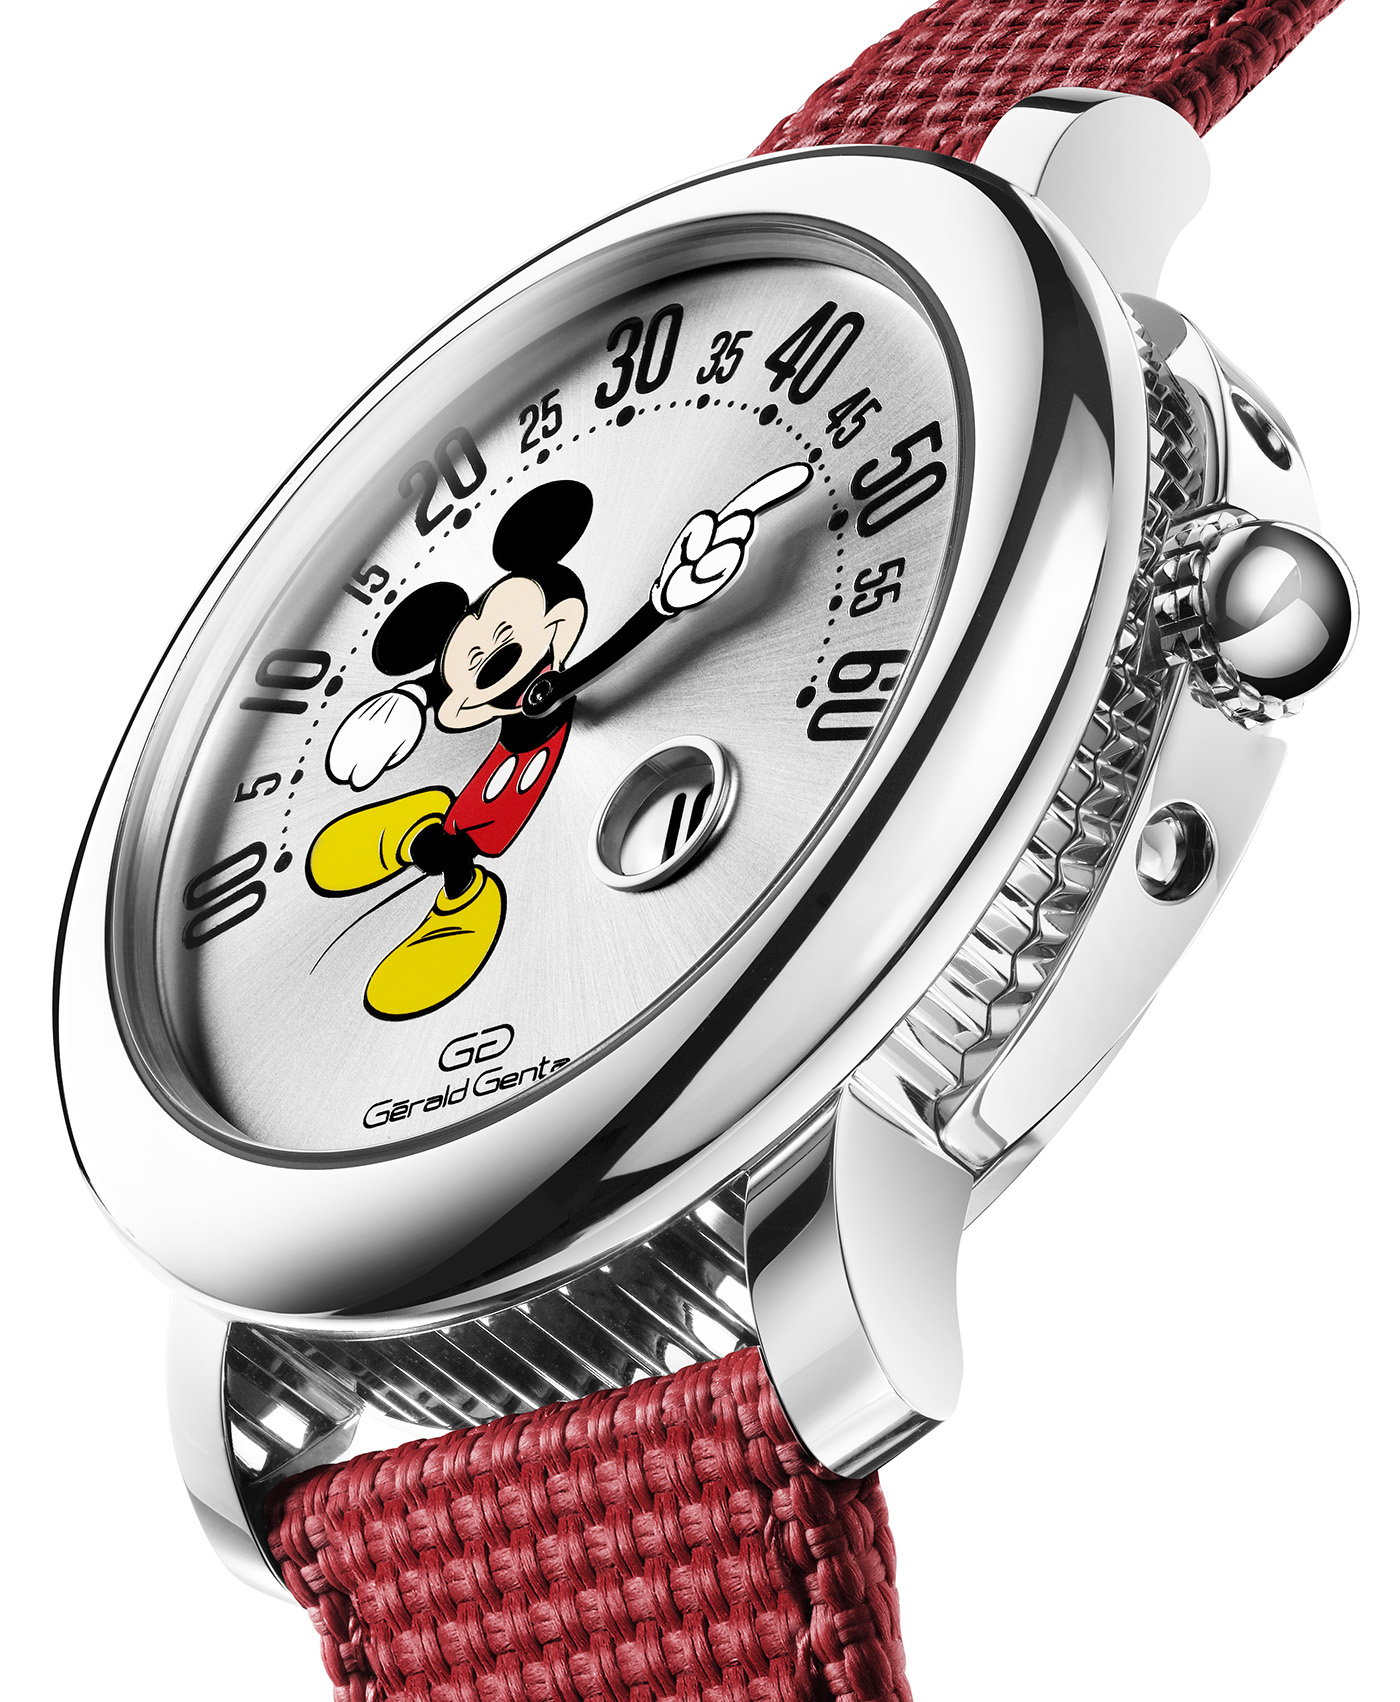 Seiko Mickey Mouse Watch Offers Online, Save 55% 